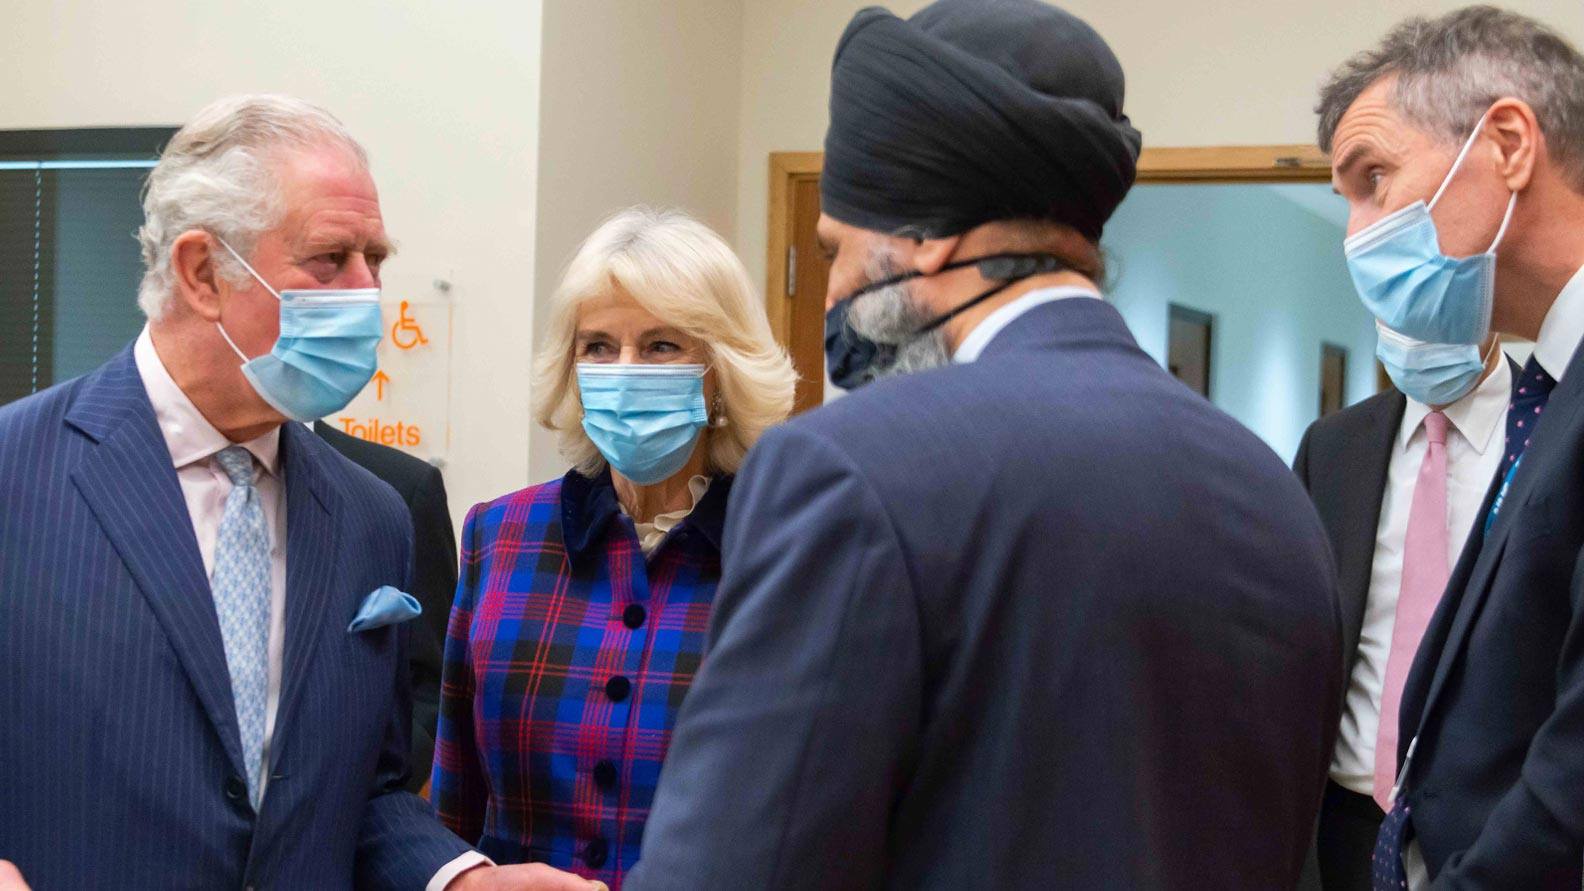 Medical staff and their Royal Highnesses The Prince of Wales and The Duchess of Cornwall